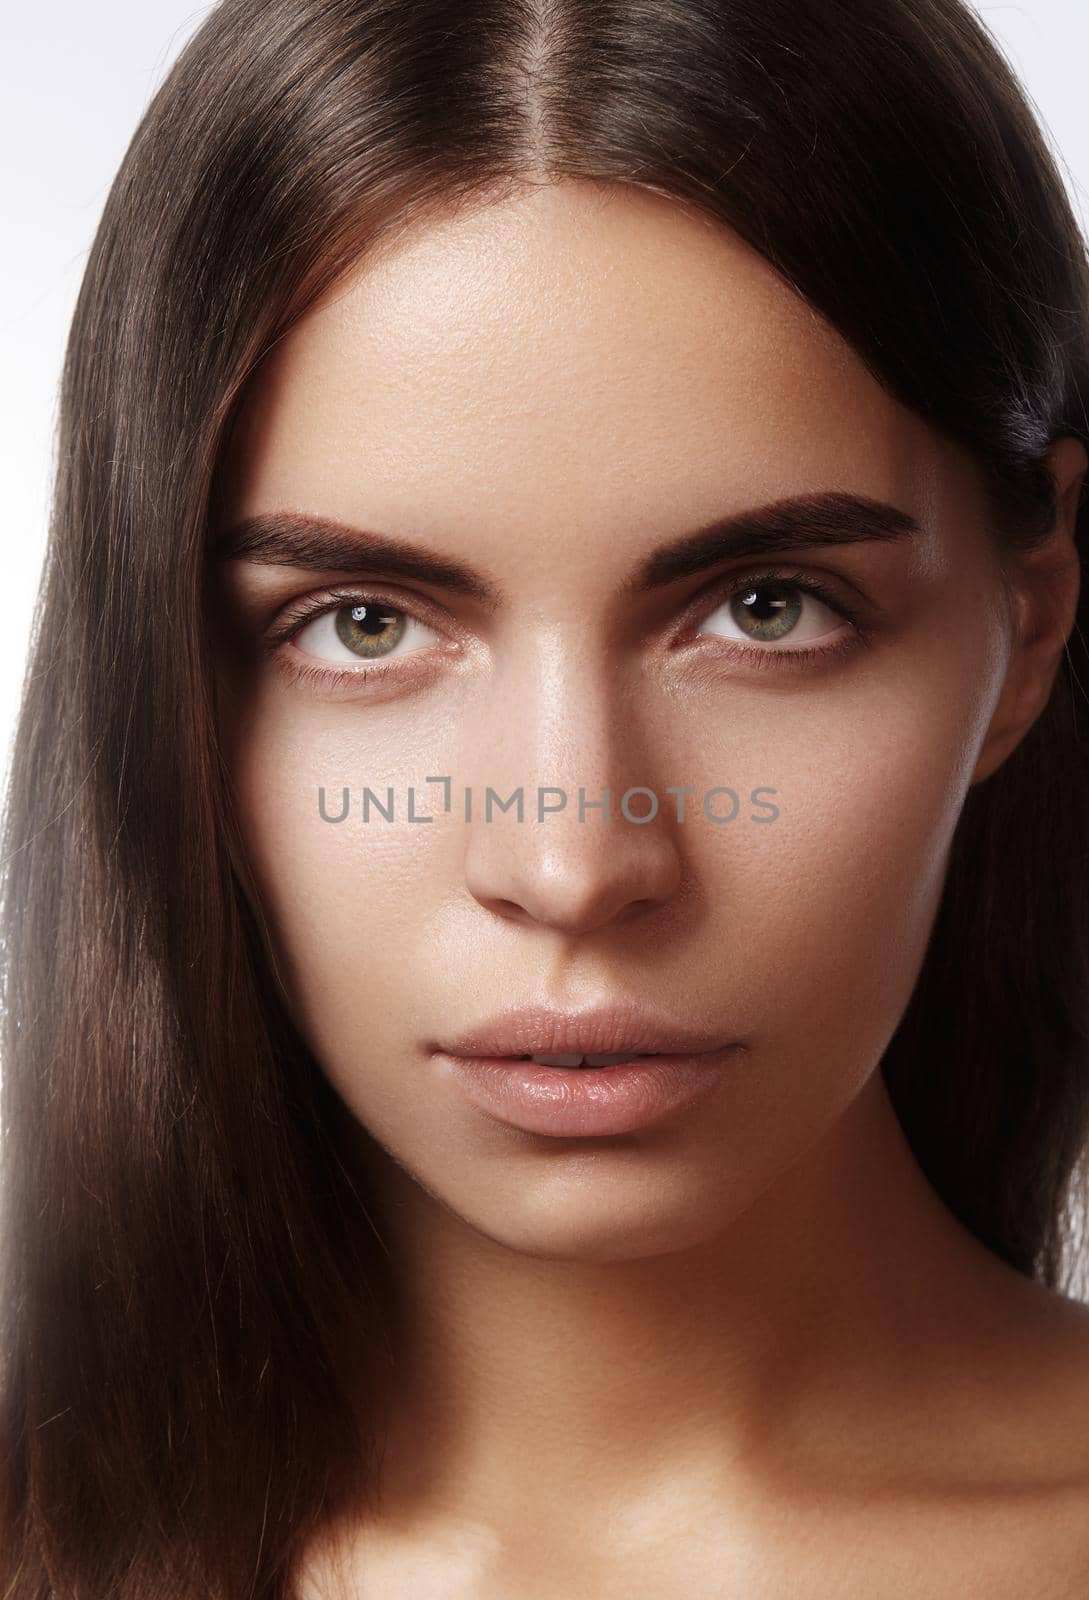 Beautiful face of young woman. Skincare, wellness, spa. Clean soft skin, healthy fresh look. Natural daily makeup by MarinaFrost